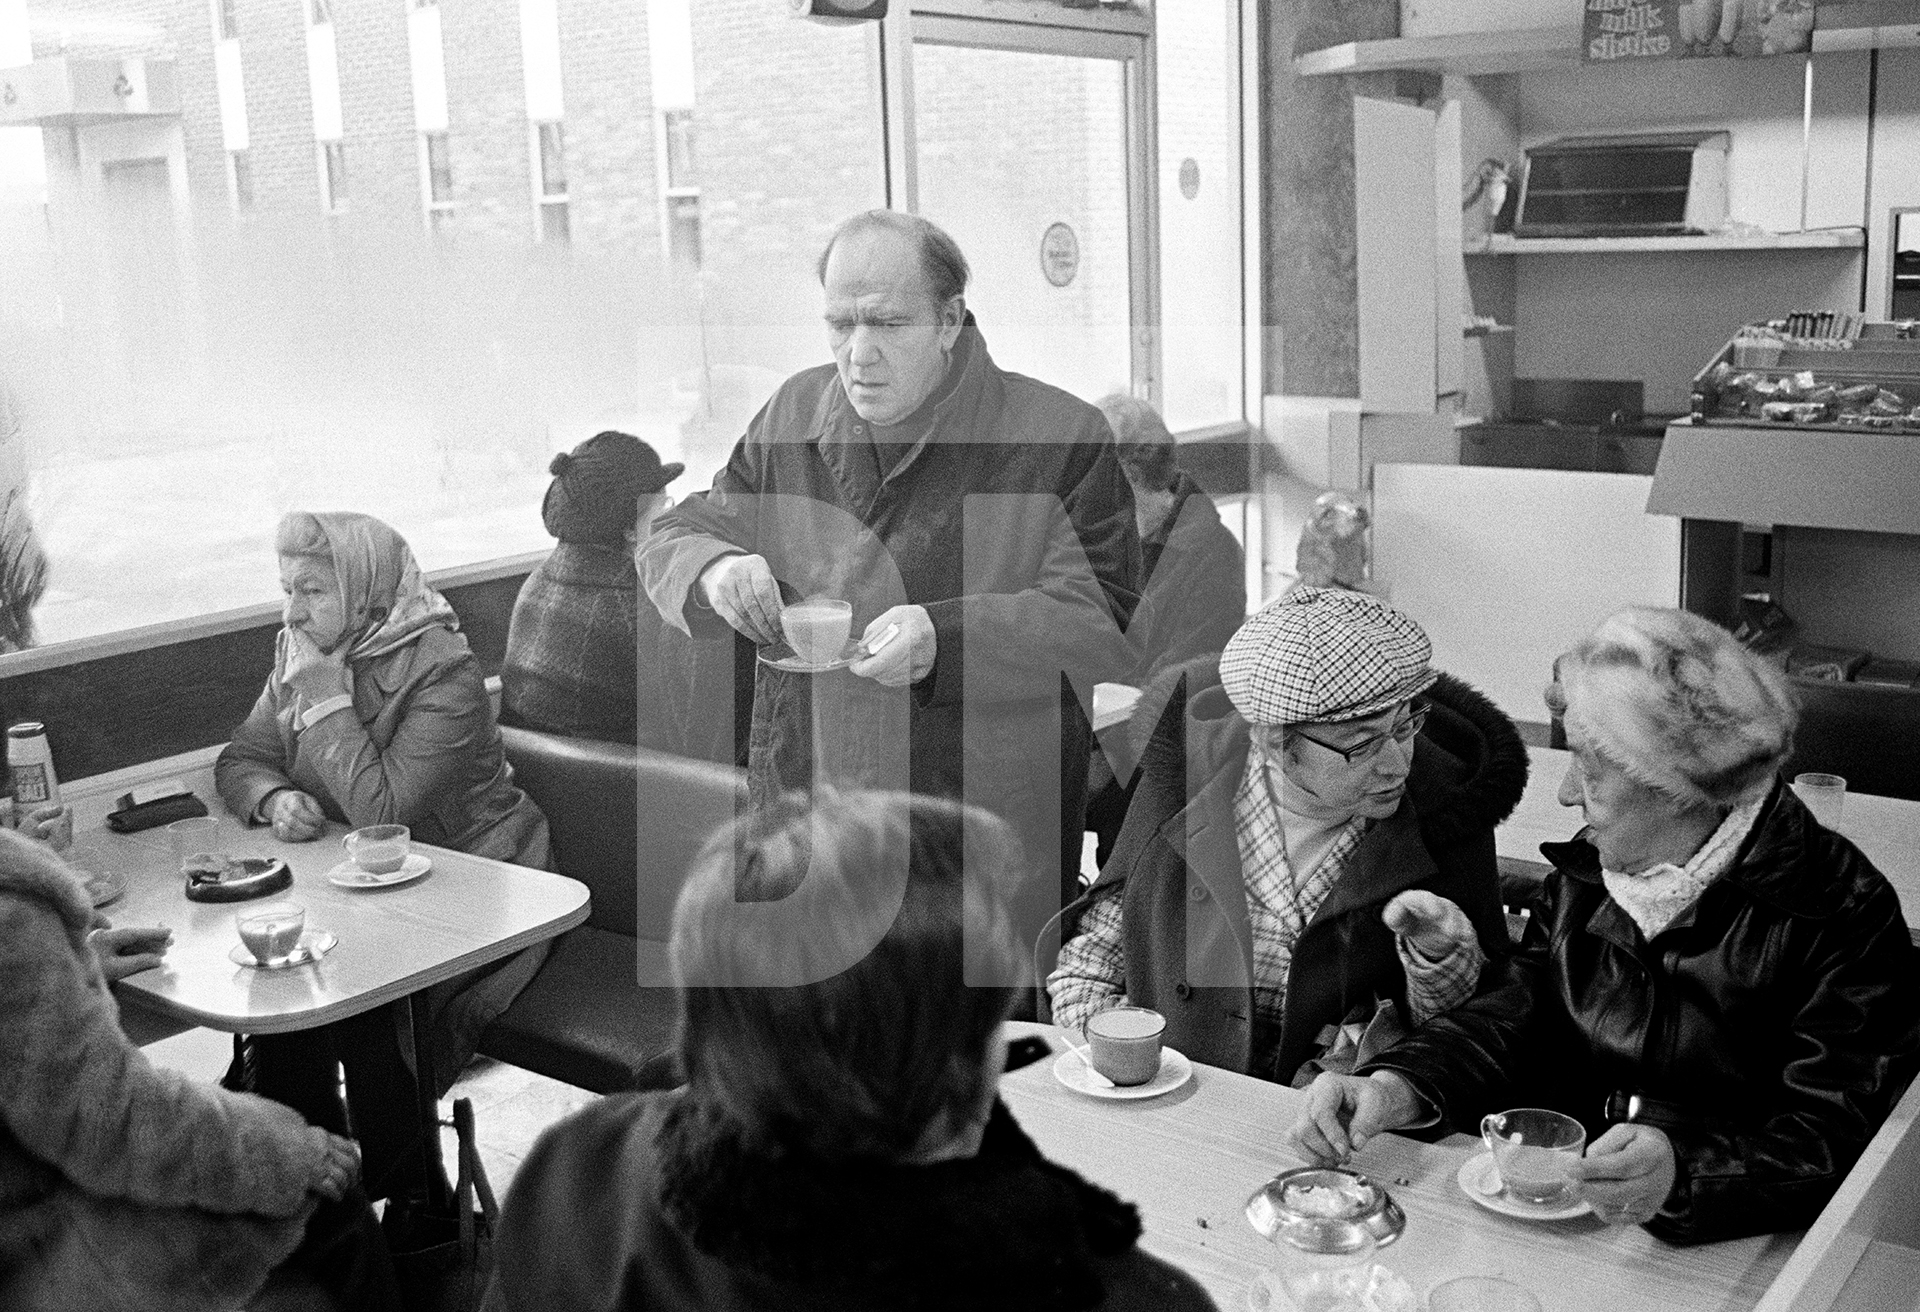 John Joe Canney, aged 54, has a supervised visit to a café. February 1978 by Daniel Meadows